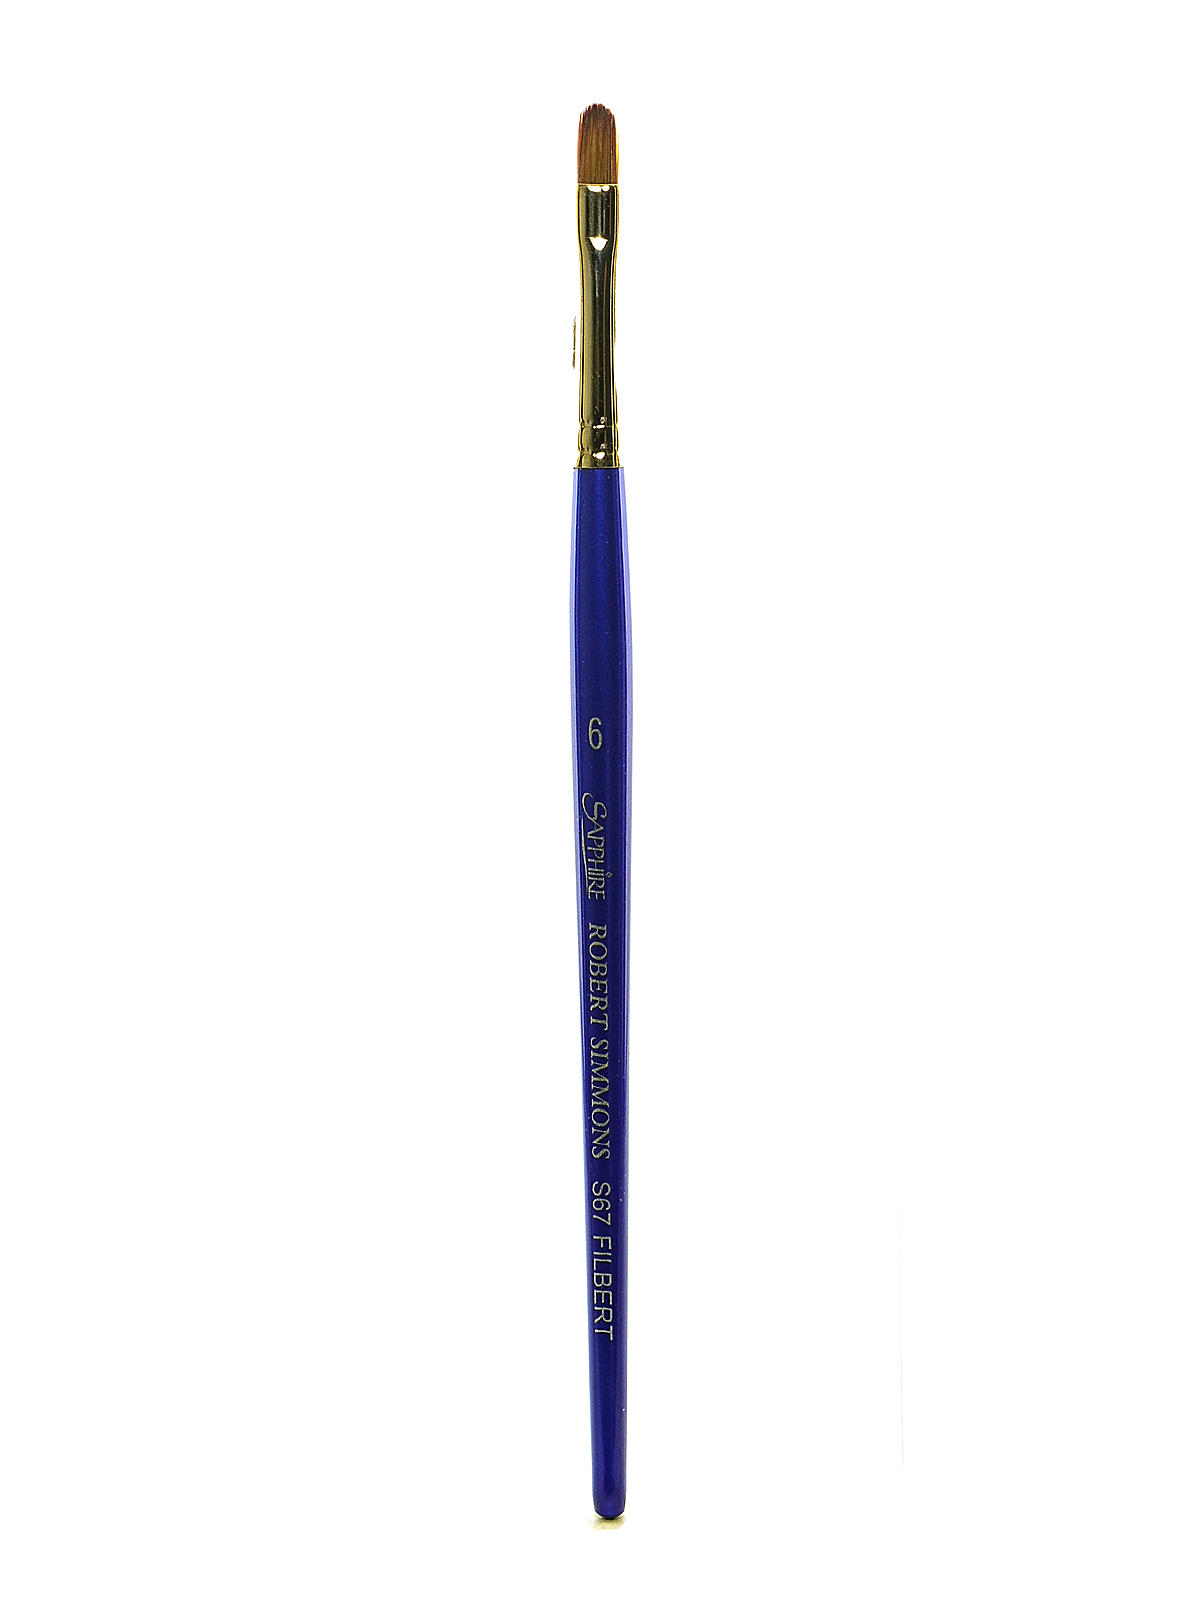 Sapphire Series Synthetic Brushes Short Handle 6 Filbert S67